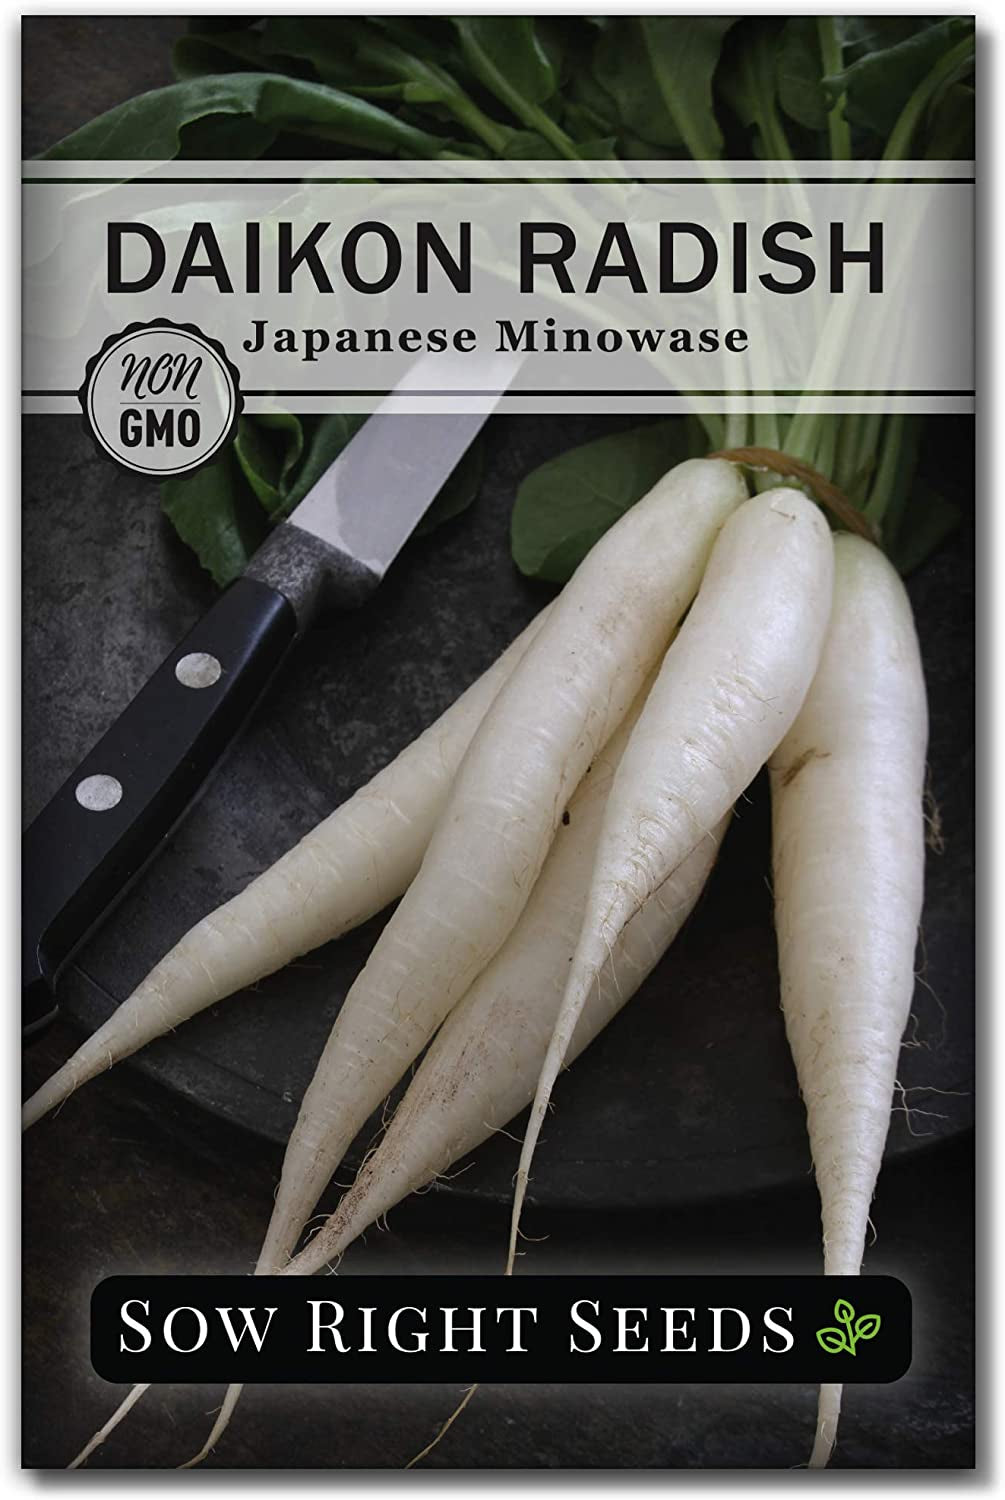 - Japanese Minowase Daikon Radish Seeds for Planting - Non-Gmo Heirloom Packet with Instructions to Plant a Home Vegetable Garden - Spring or Fall Planting Outdoors - Long White (1)